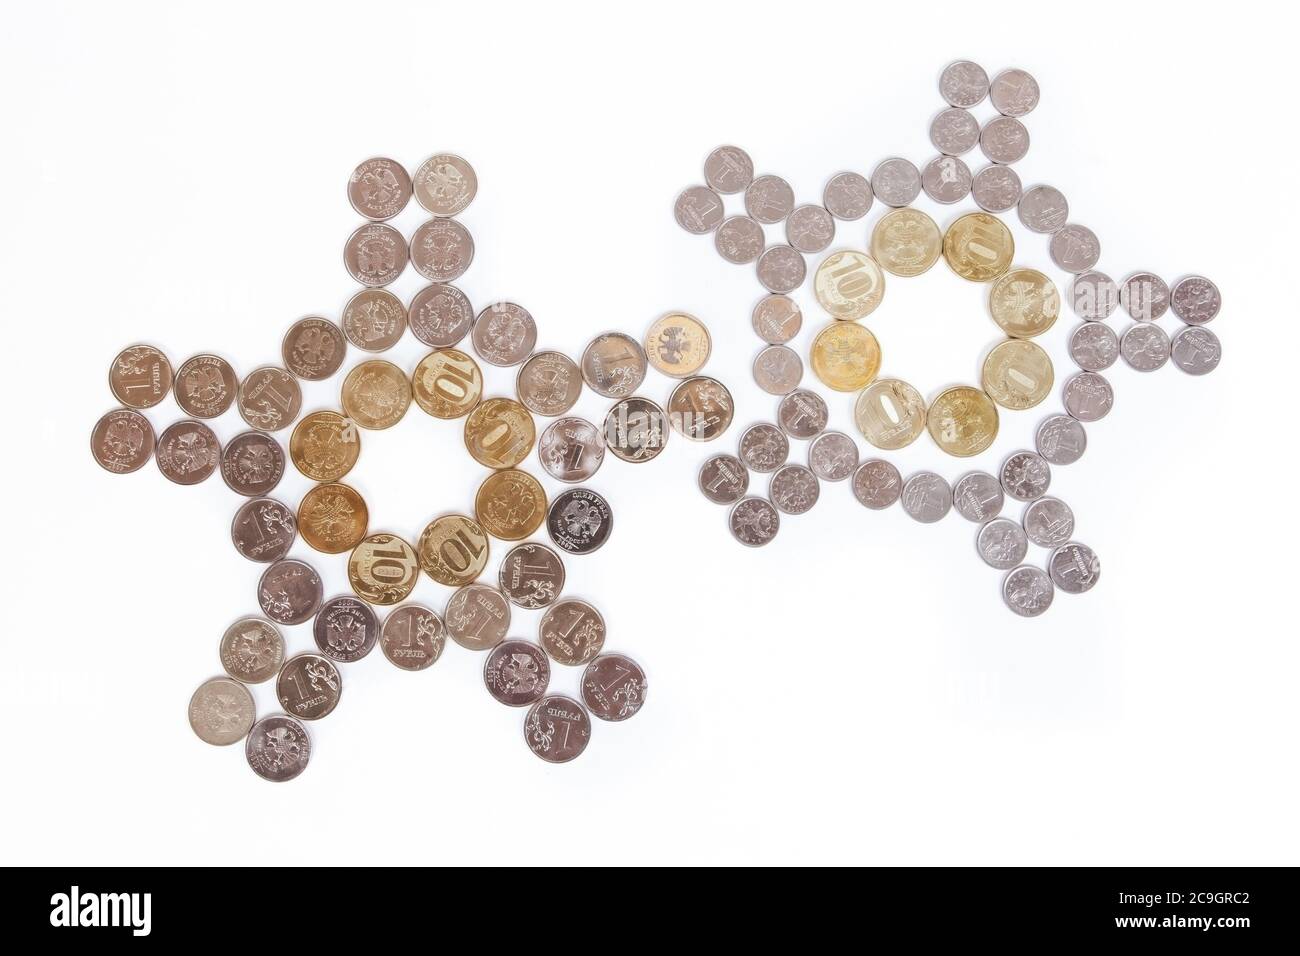 Coins laid out in the shape of a clock on a white background Stock Photo